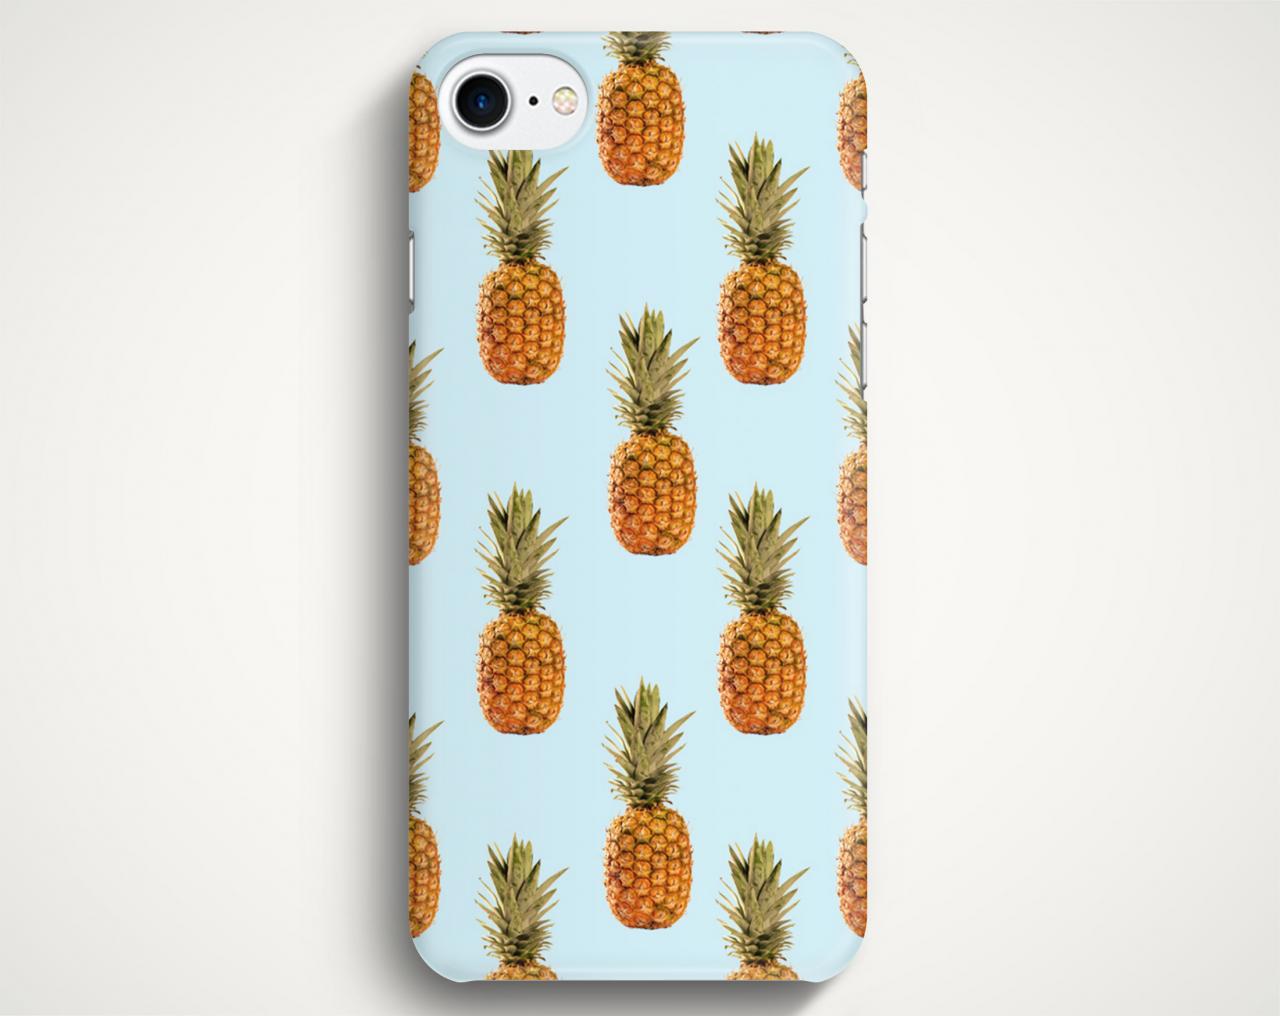 Pineapple Print Light Blue Phone Case For Iphone And Android Phones